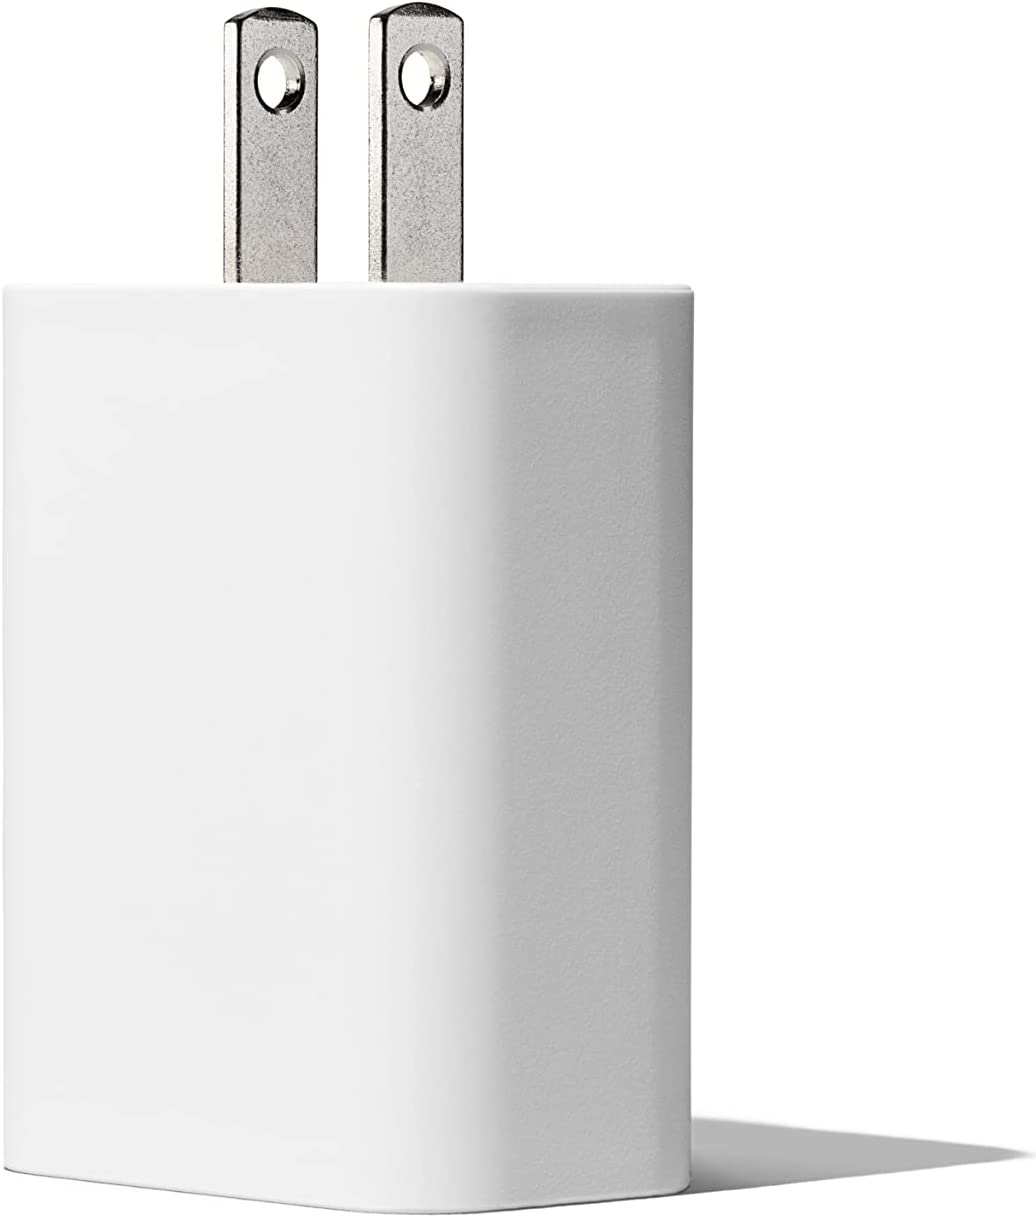 Google - GA03501-US 30W USB-C Charger - Clearly White